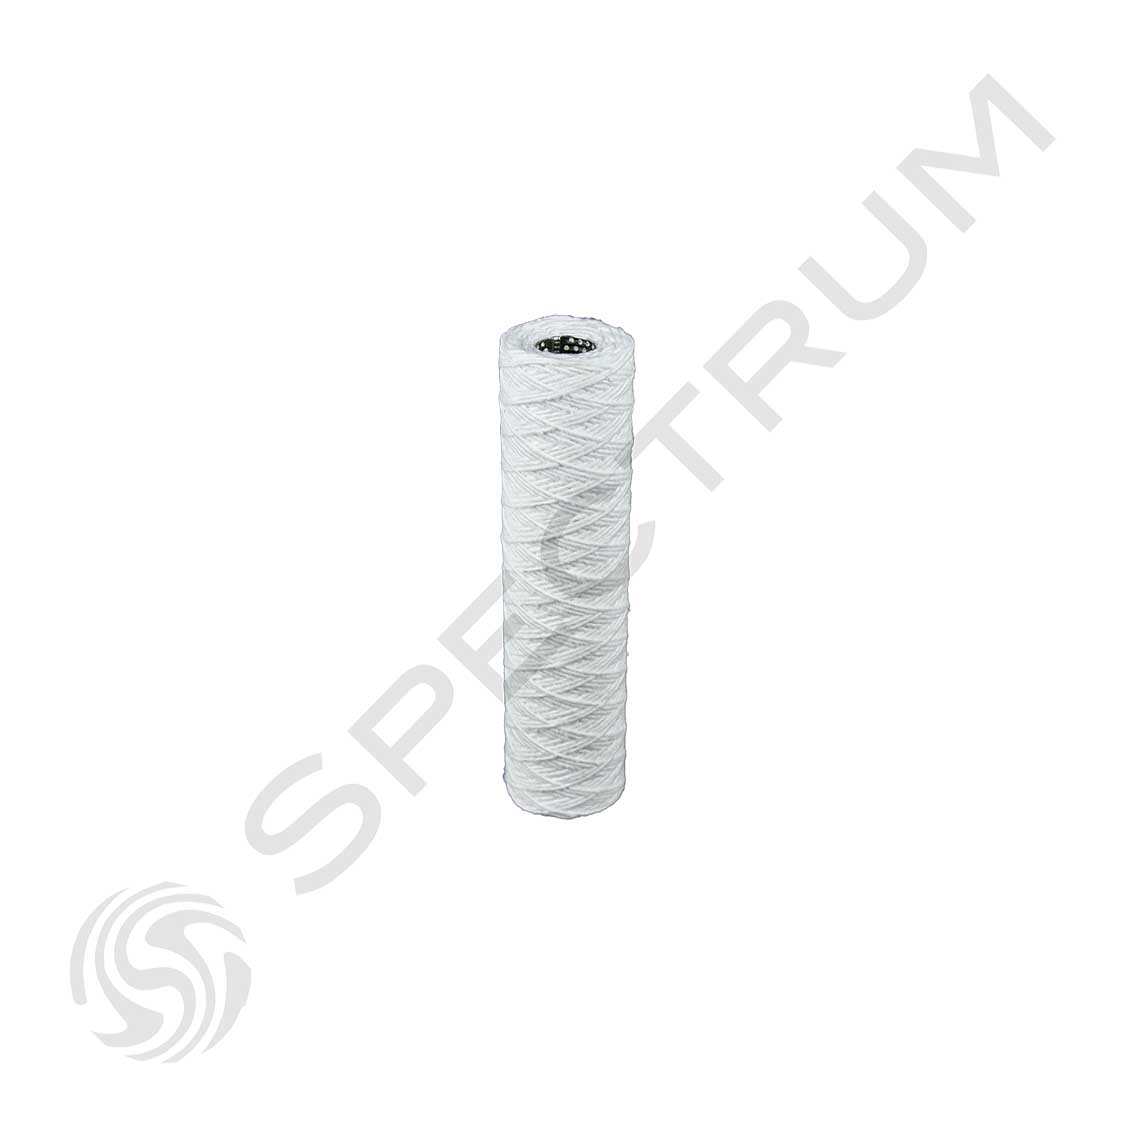 SPECTRUM SWC-1-10 Wound Cotton Filter Cartridge with Stainless Steel Core  1 micron  10